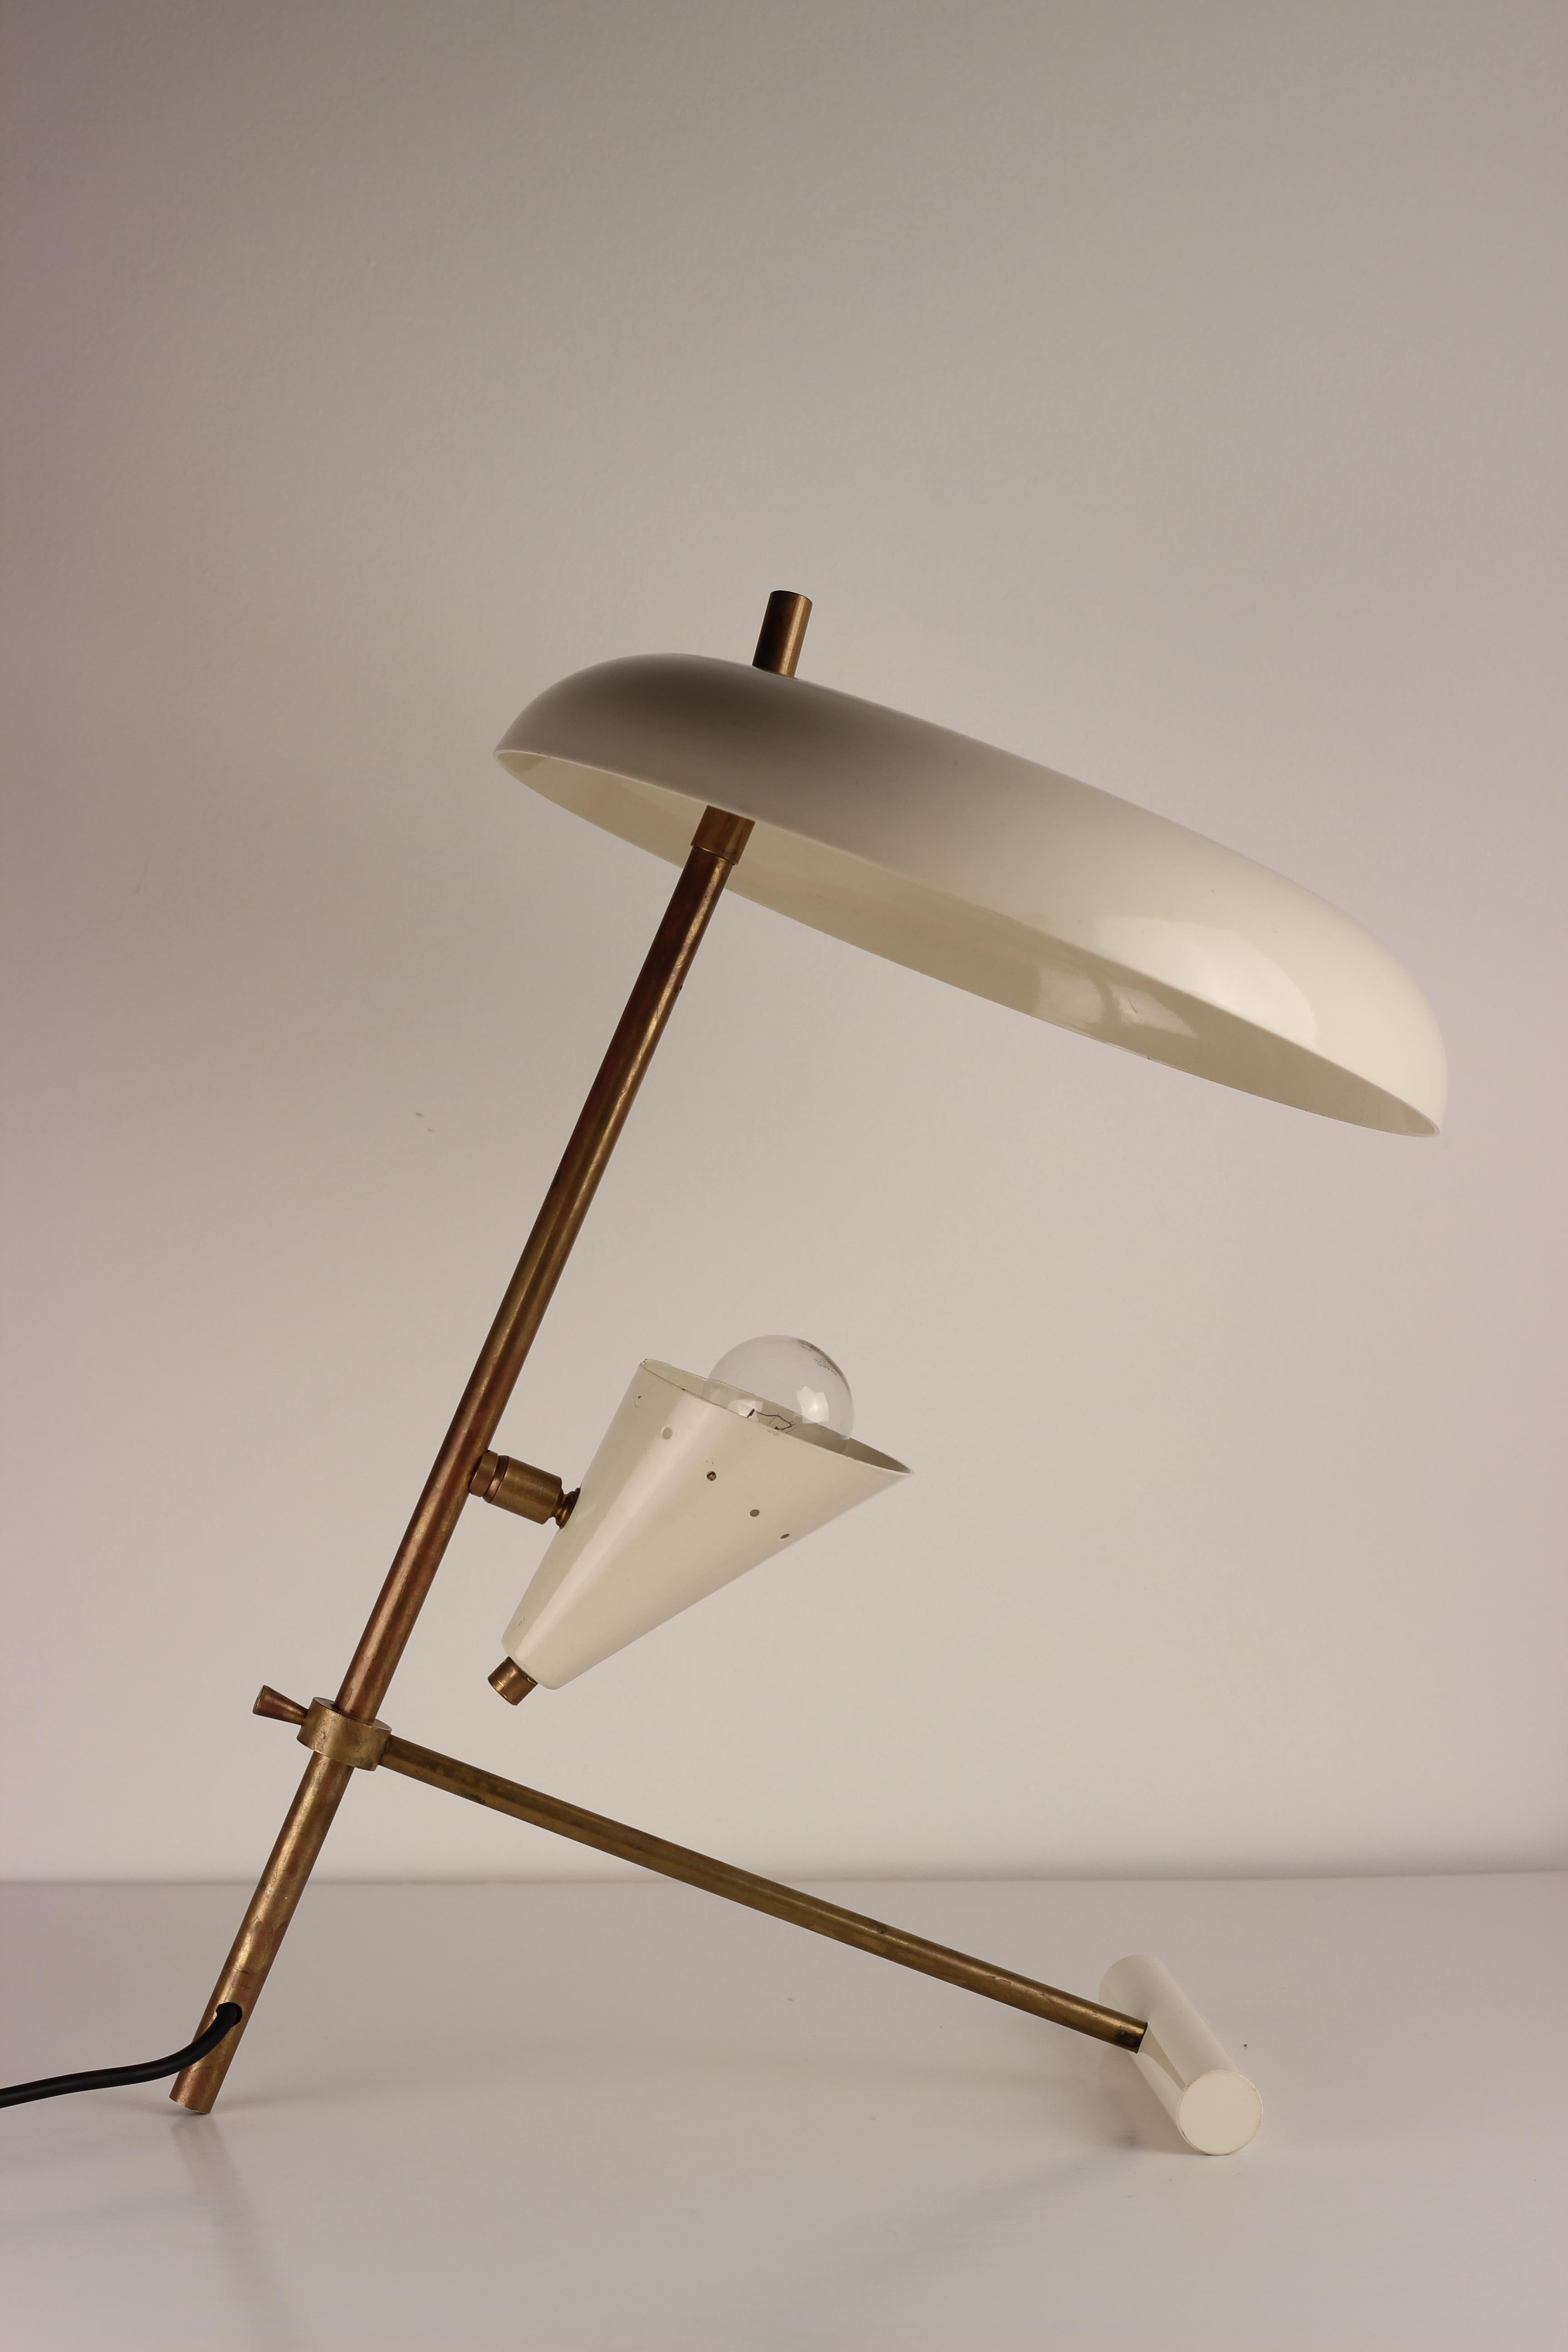 A Mid-Century Modern style Italian table lamp or desk lamp made of brass and white lacquered metal, with two directional designed lampshades, with one bulb holder in the smaller shade. We believe this piece to be of recent 21st century production